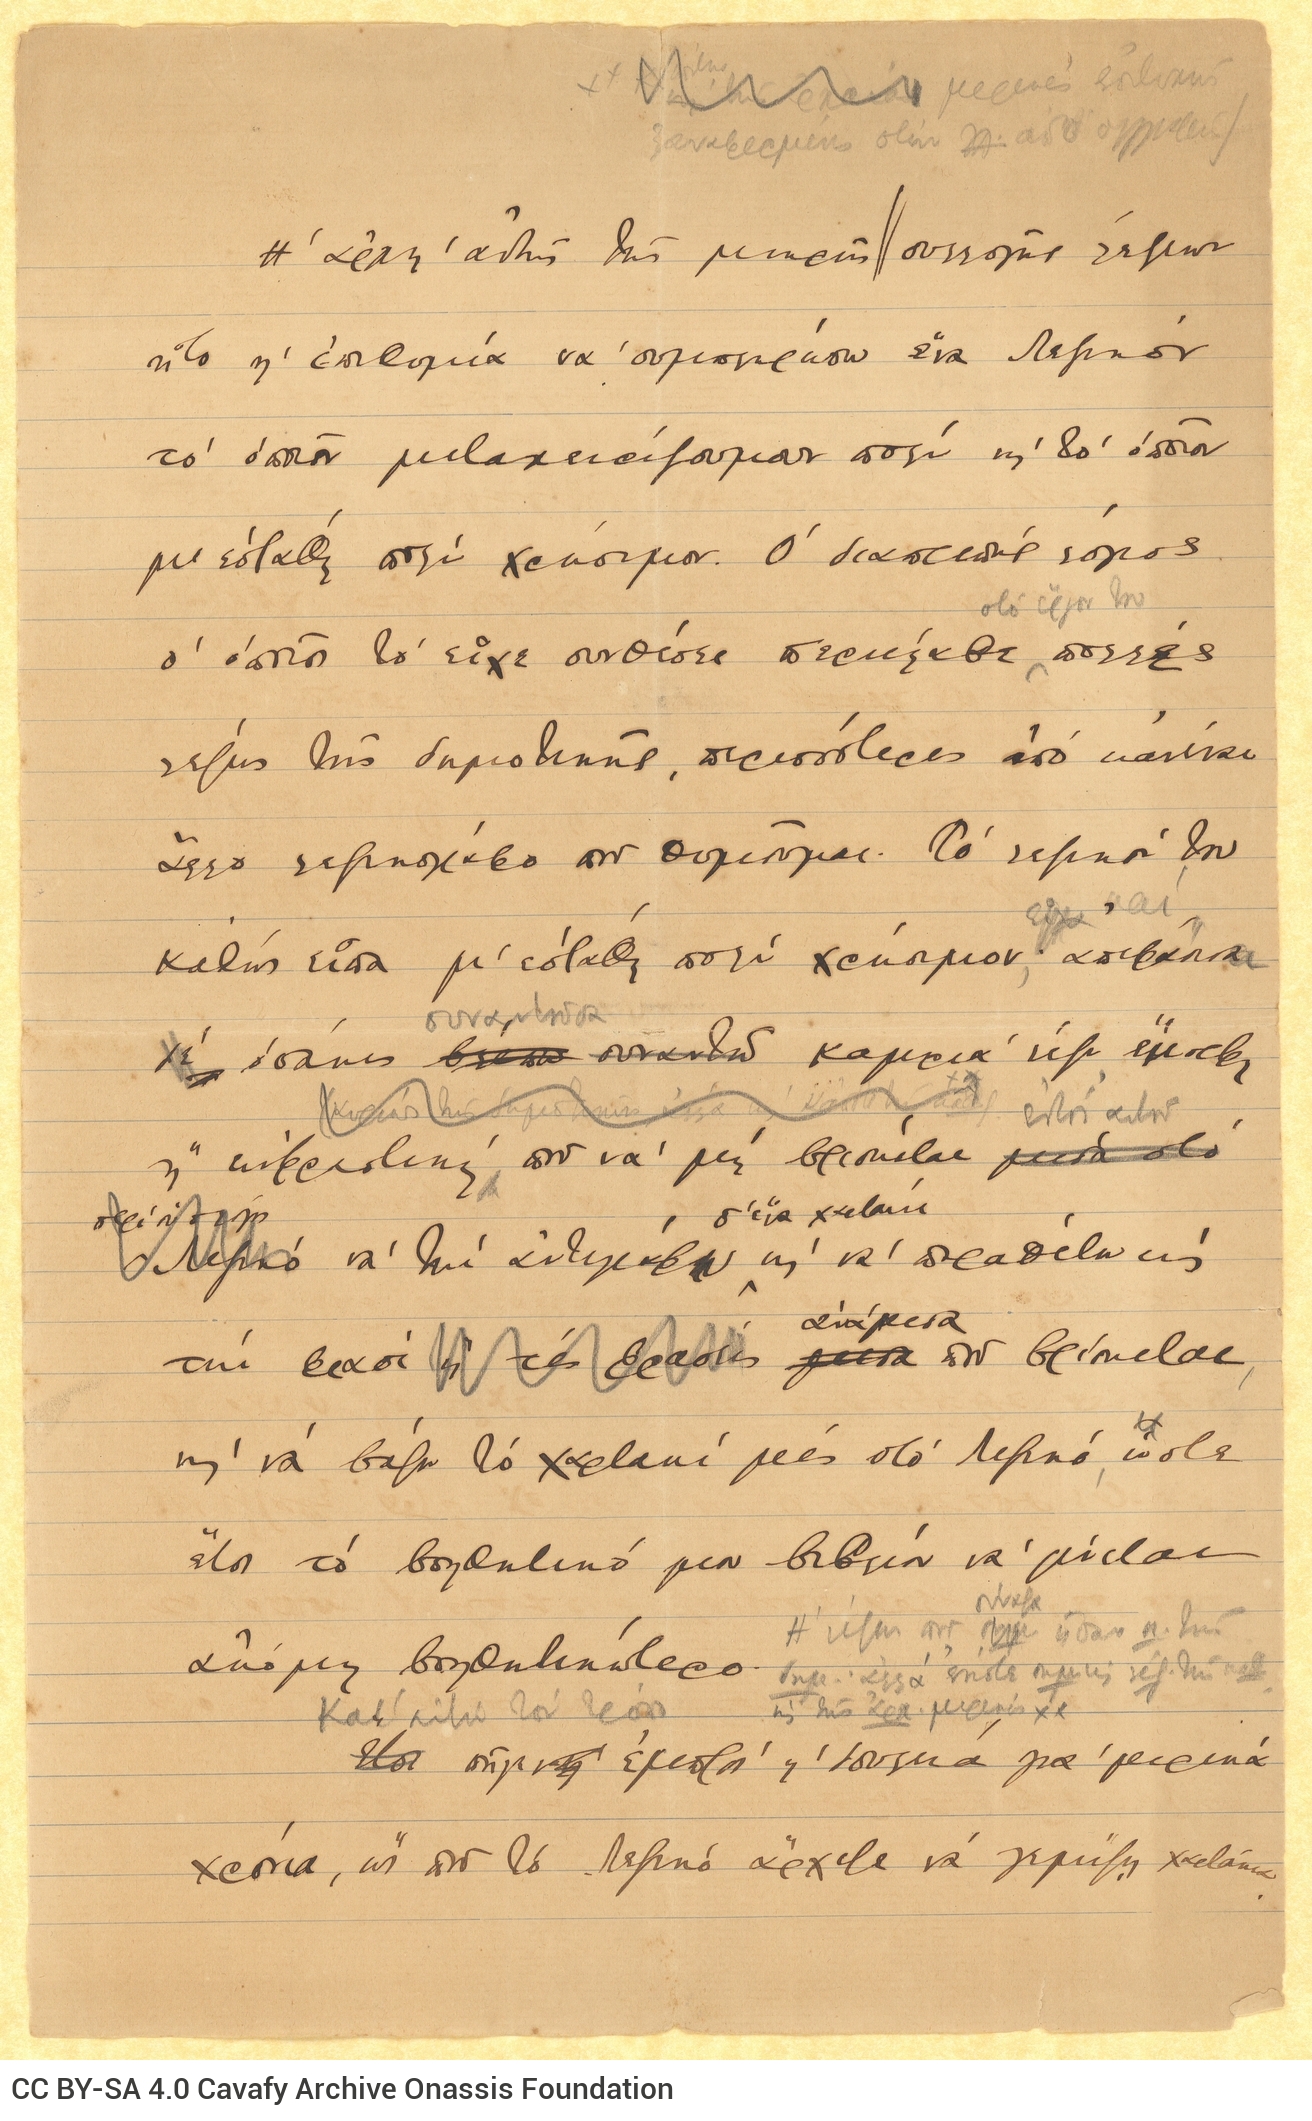 Handwritten text on two ruled double sheet notepapers. Cancellations, emendations and additions. The poet mentions the rea